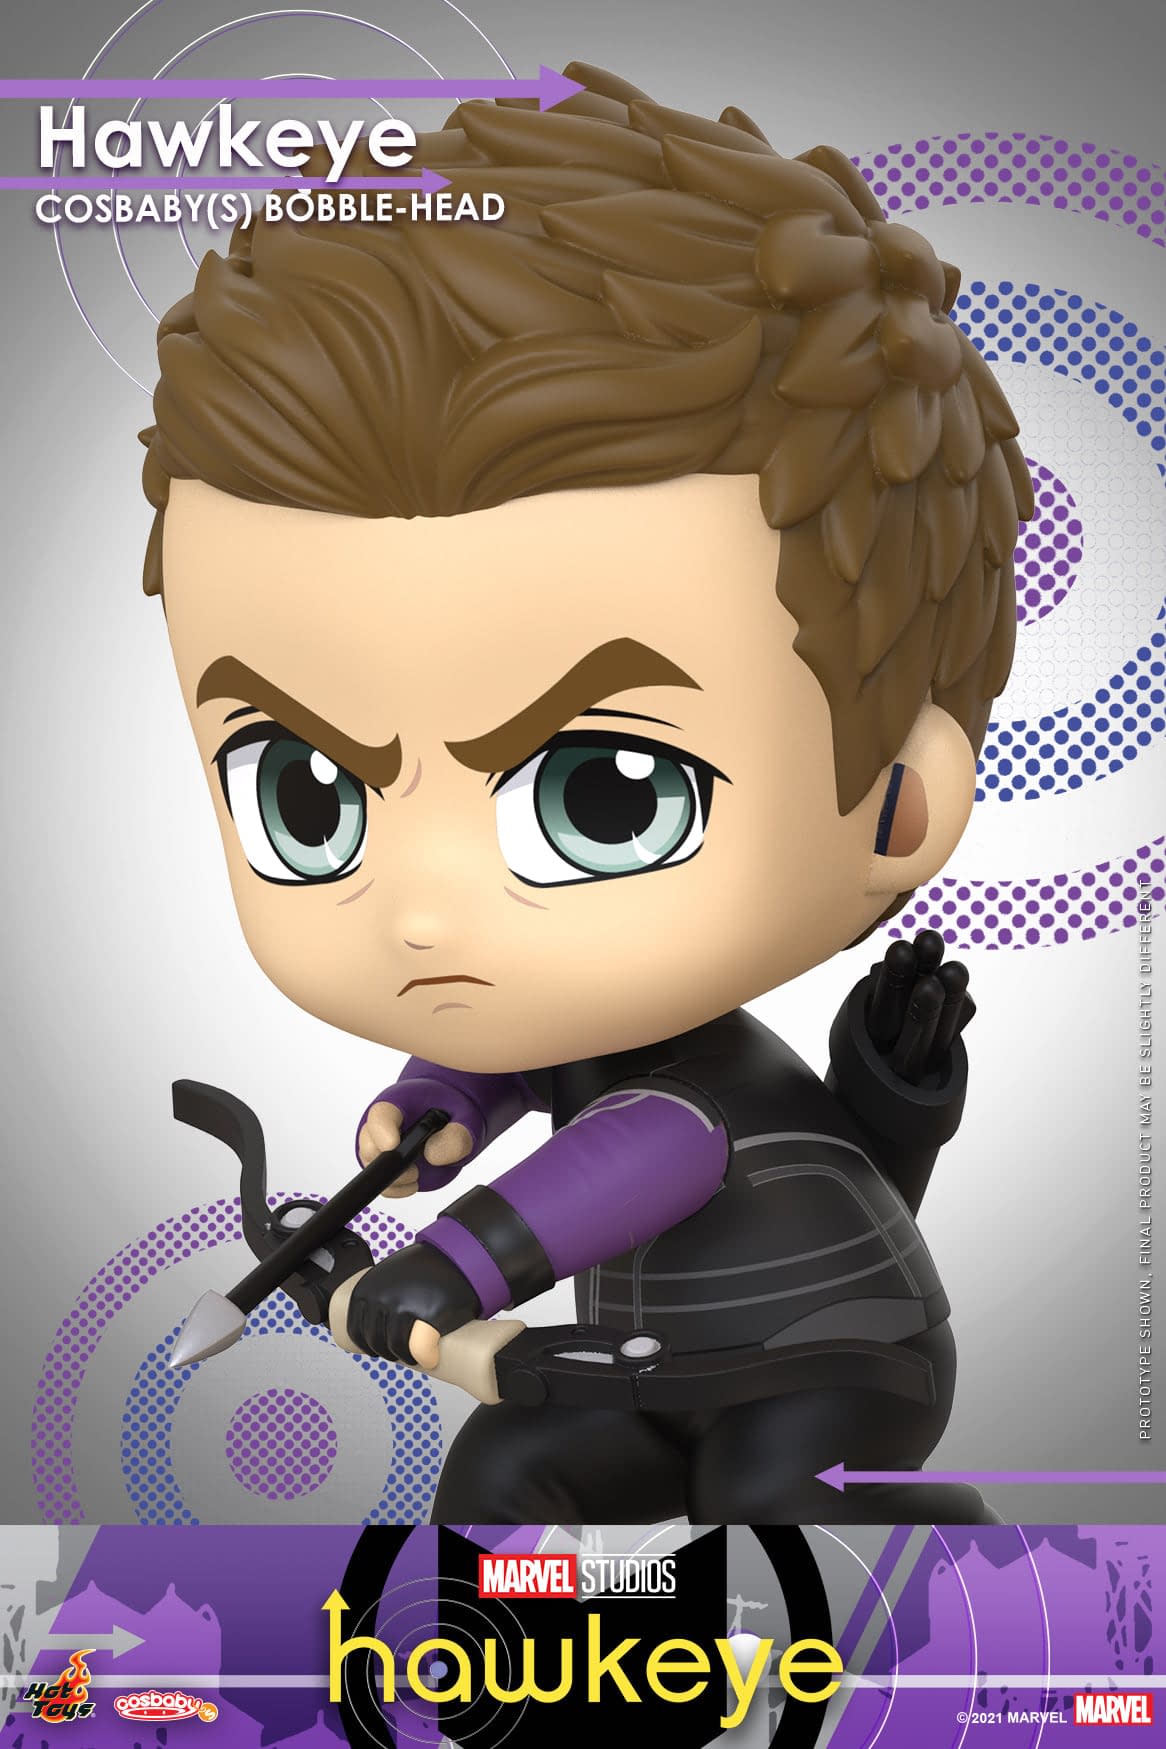 Marvel Hot Toys Avengers END GAME Hawkeye Cosbaby 